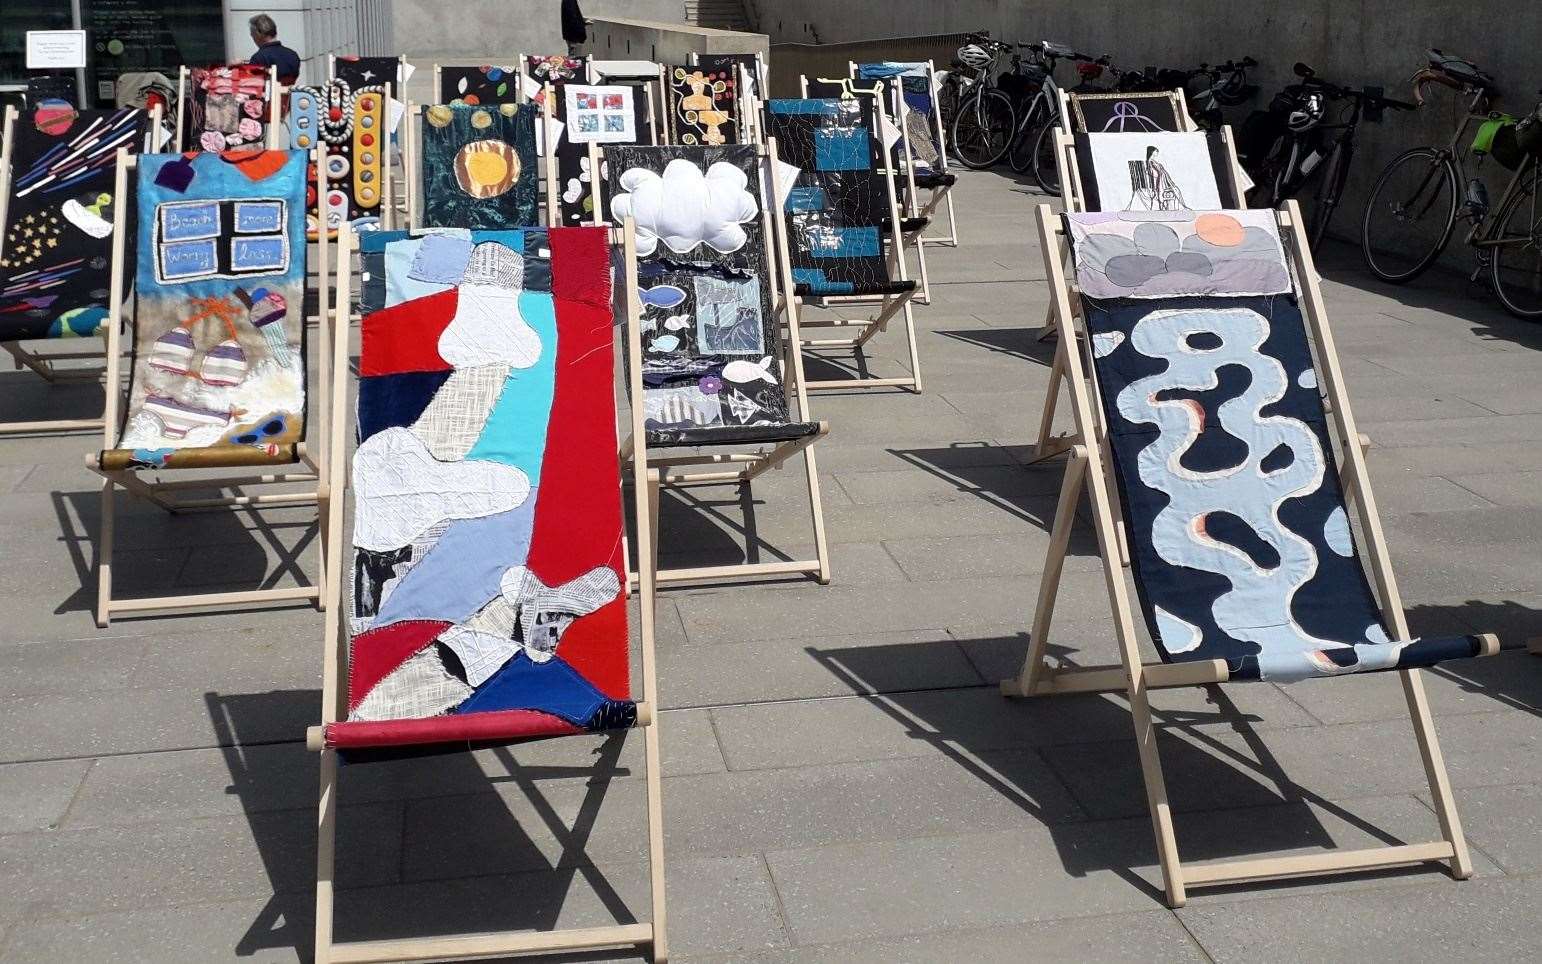 The deckchairs on display. Picture: East Kent Schools Together